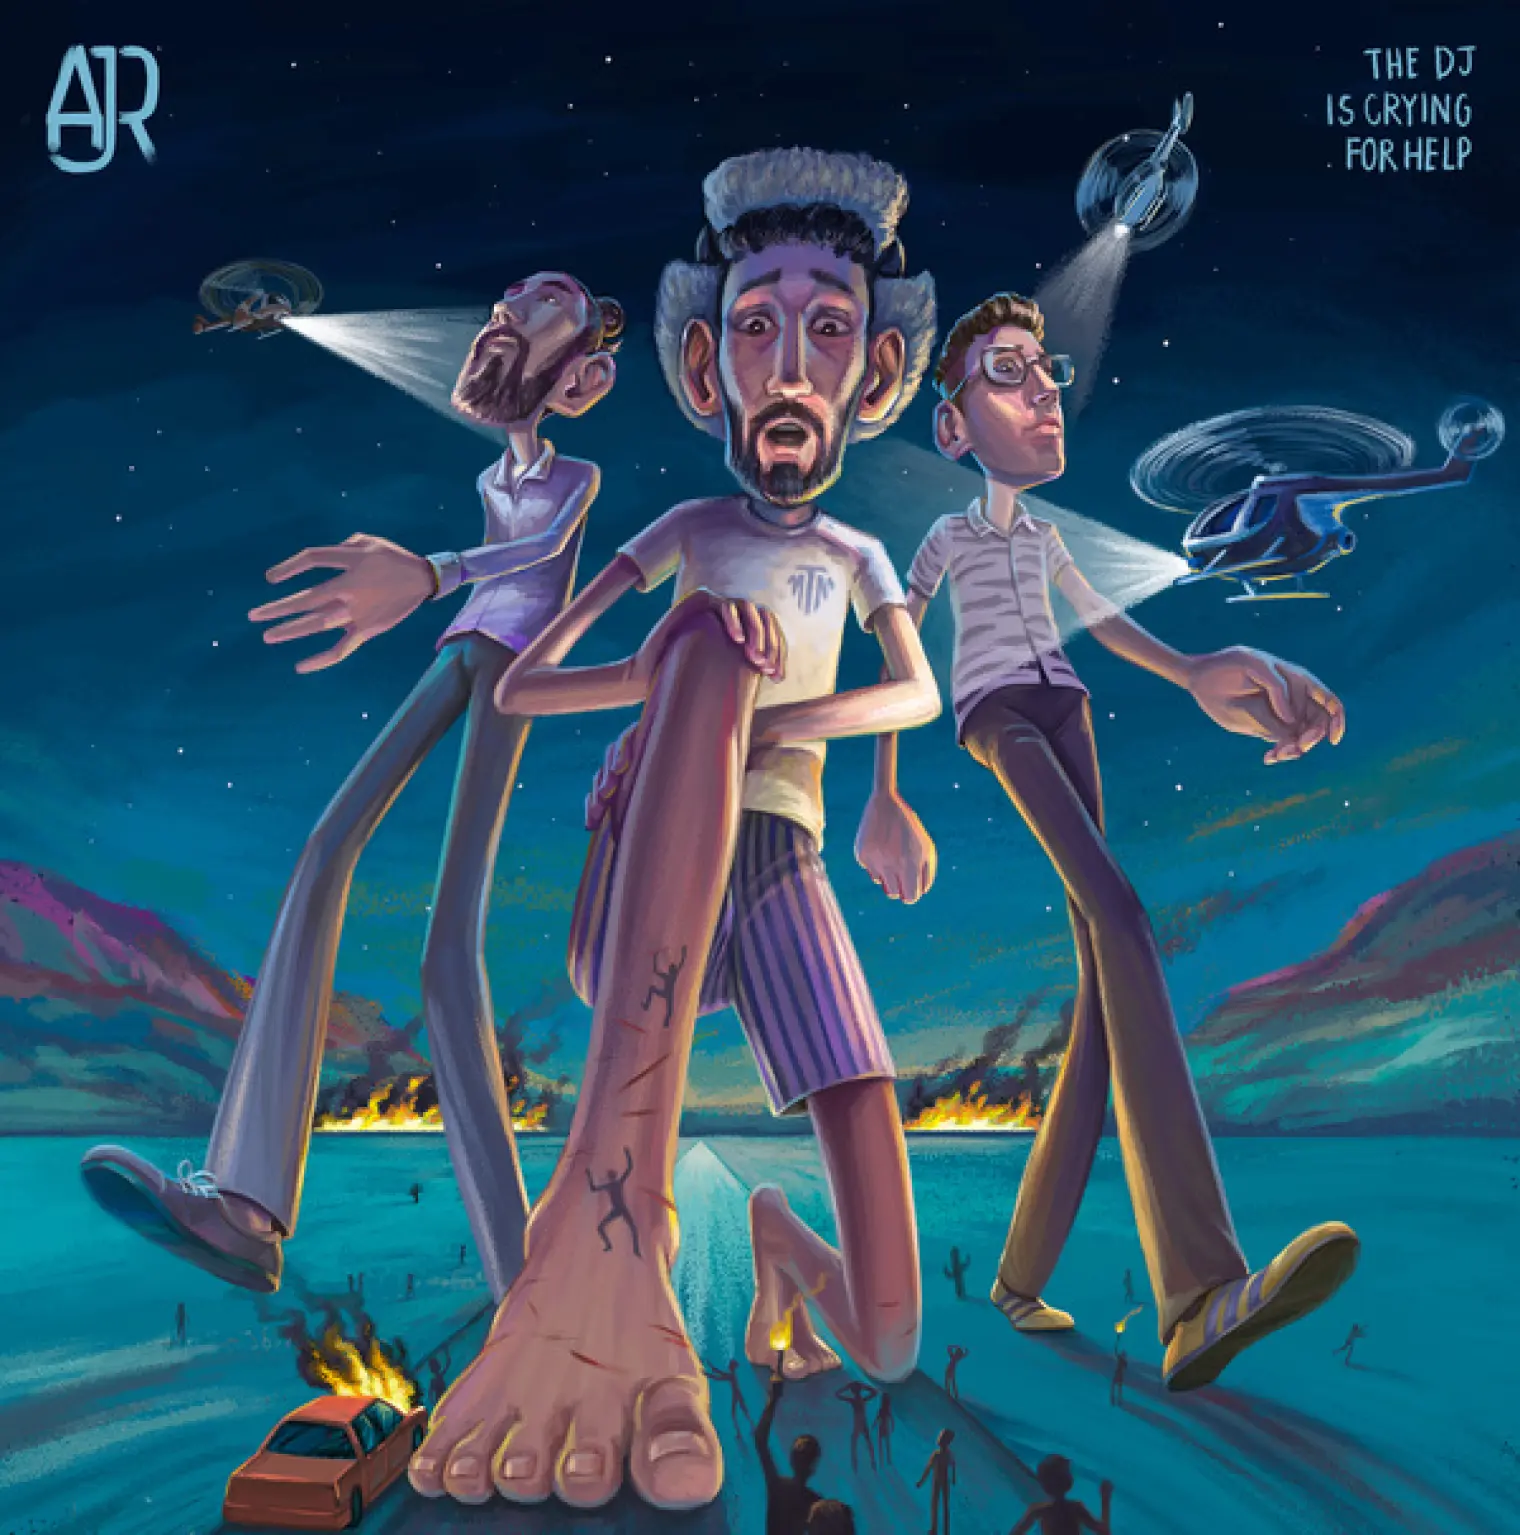 The DJ Is Crying For Help -  AJR 